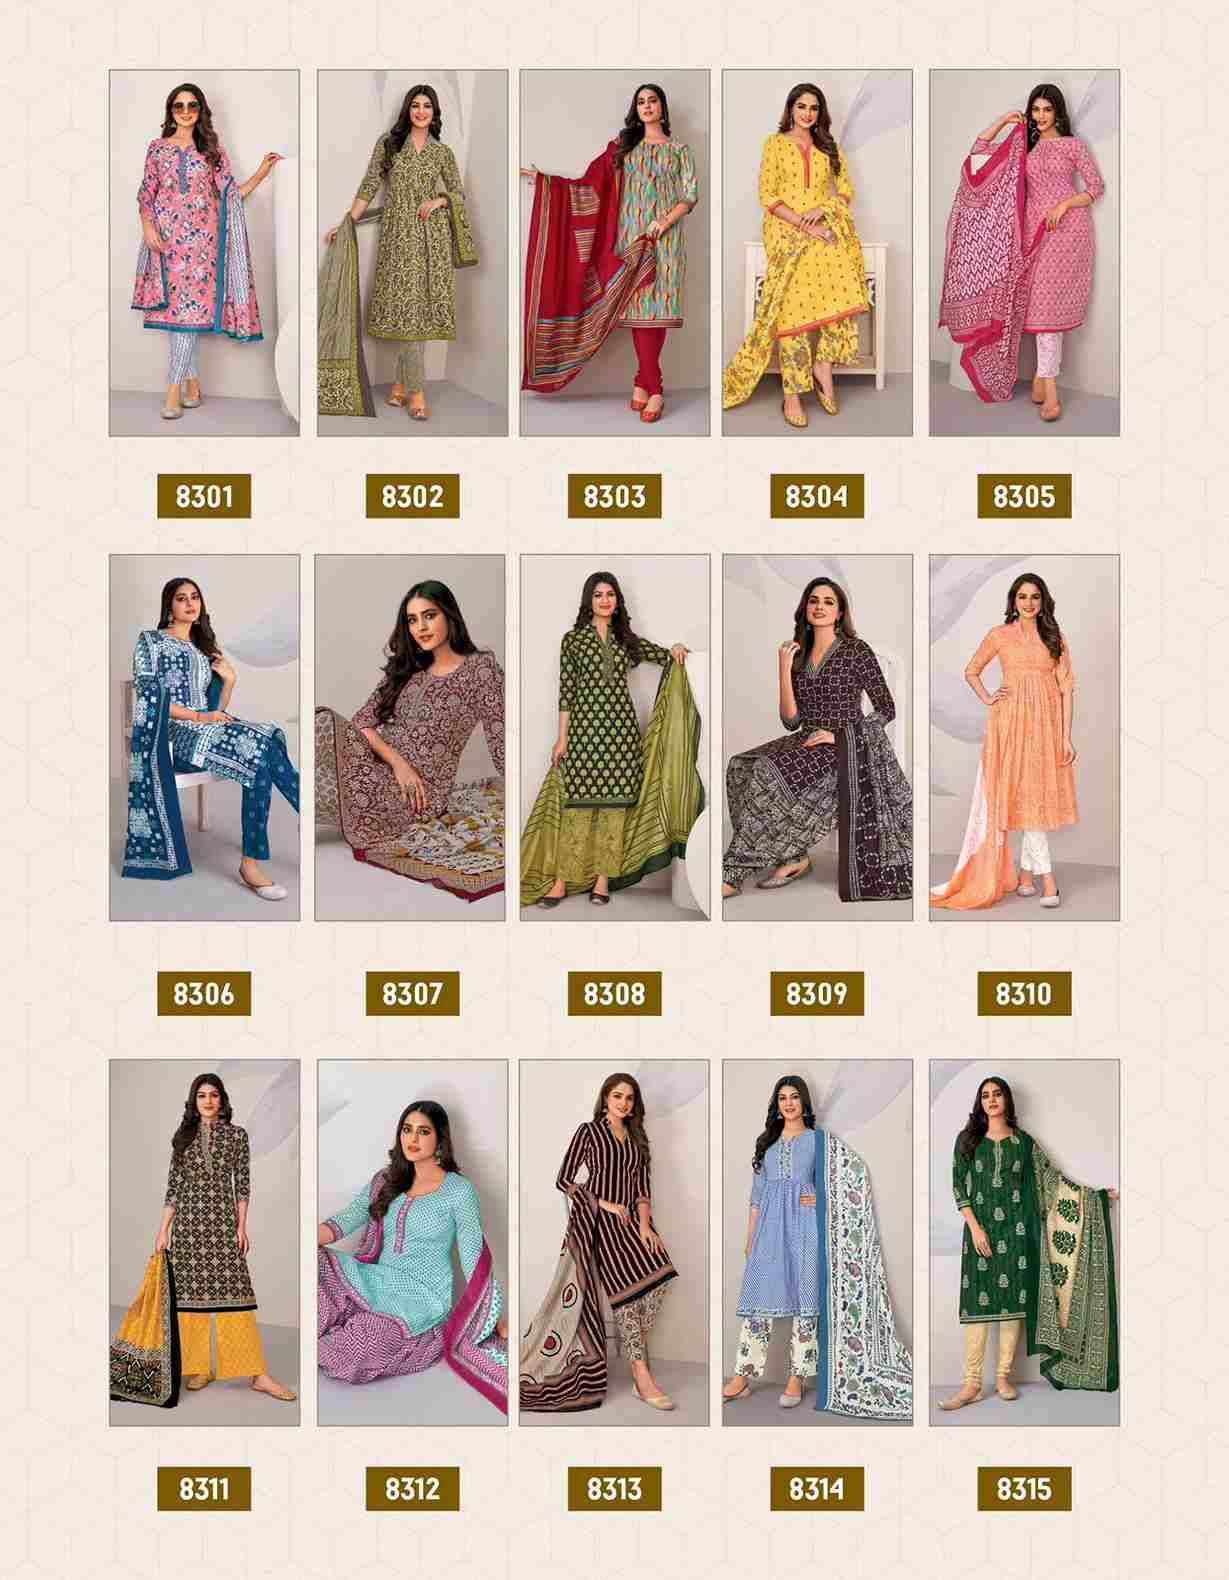 Miss India Vol-83 By Deeptex Prints 8301 To 8326 Series Beautiful Festive Suits Stylish Fancy Colorful Casual Wear & Ethnic Wear Cotton Print Dresses At Wholesale Price